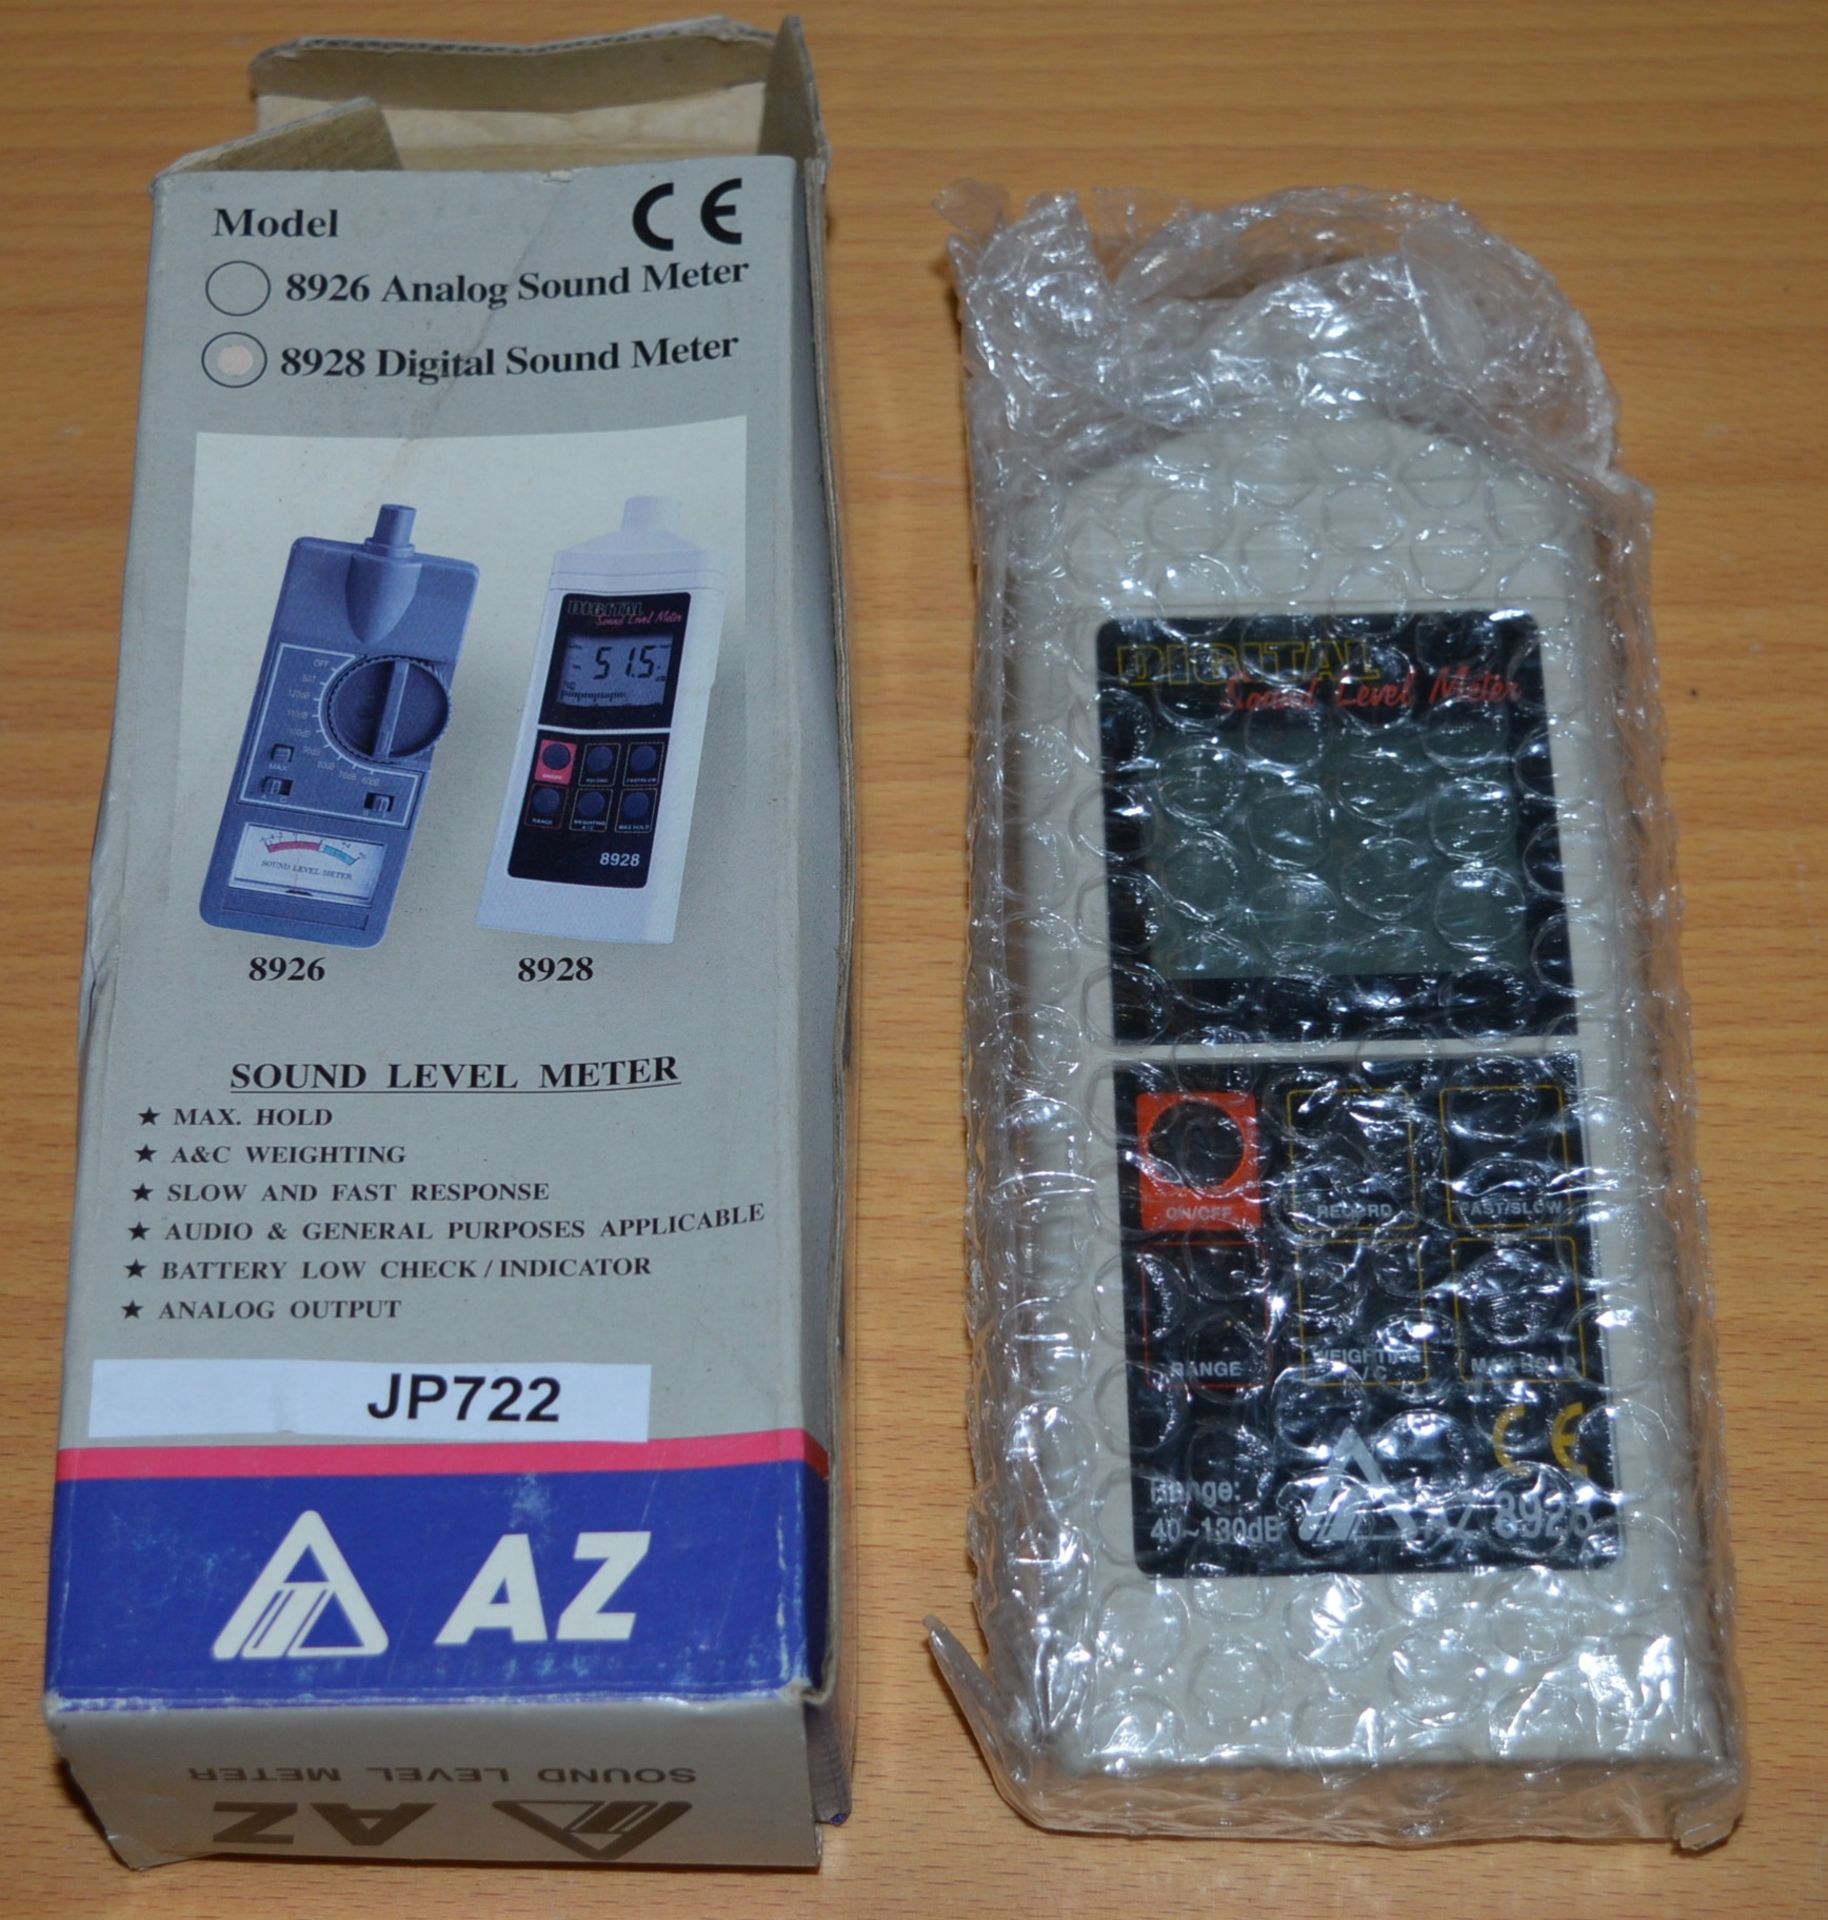 1 x Portable Sound Level Meter - Midel AZ 8928  - Boxed With Instructions, Software CD and Product - Image 2 of 4